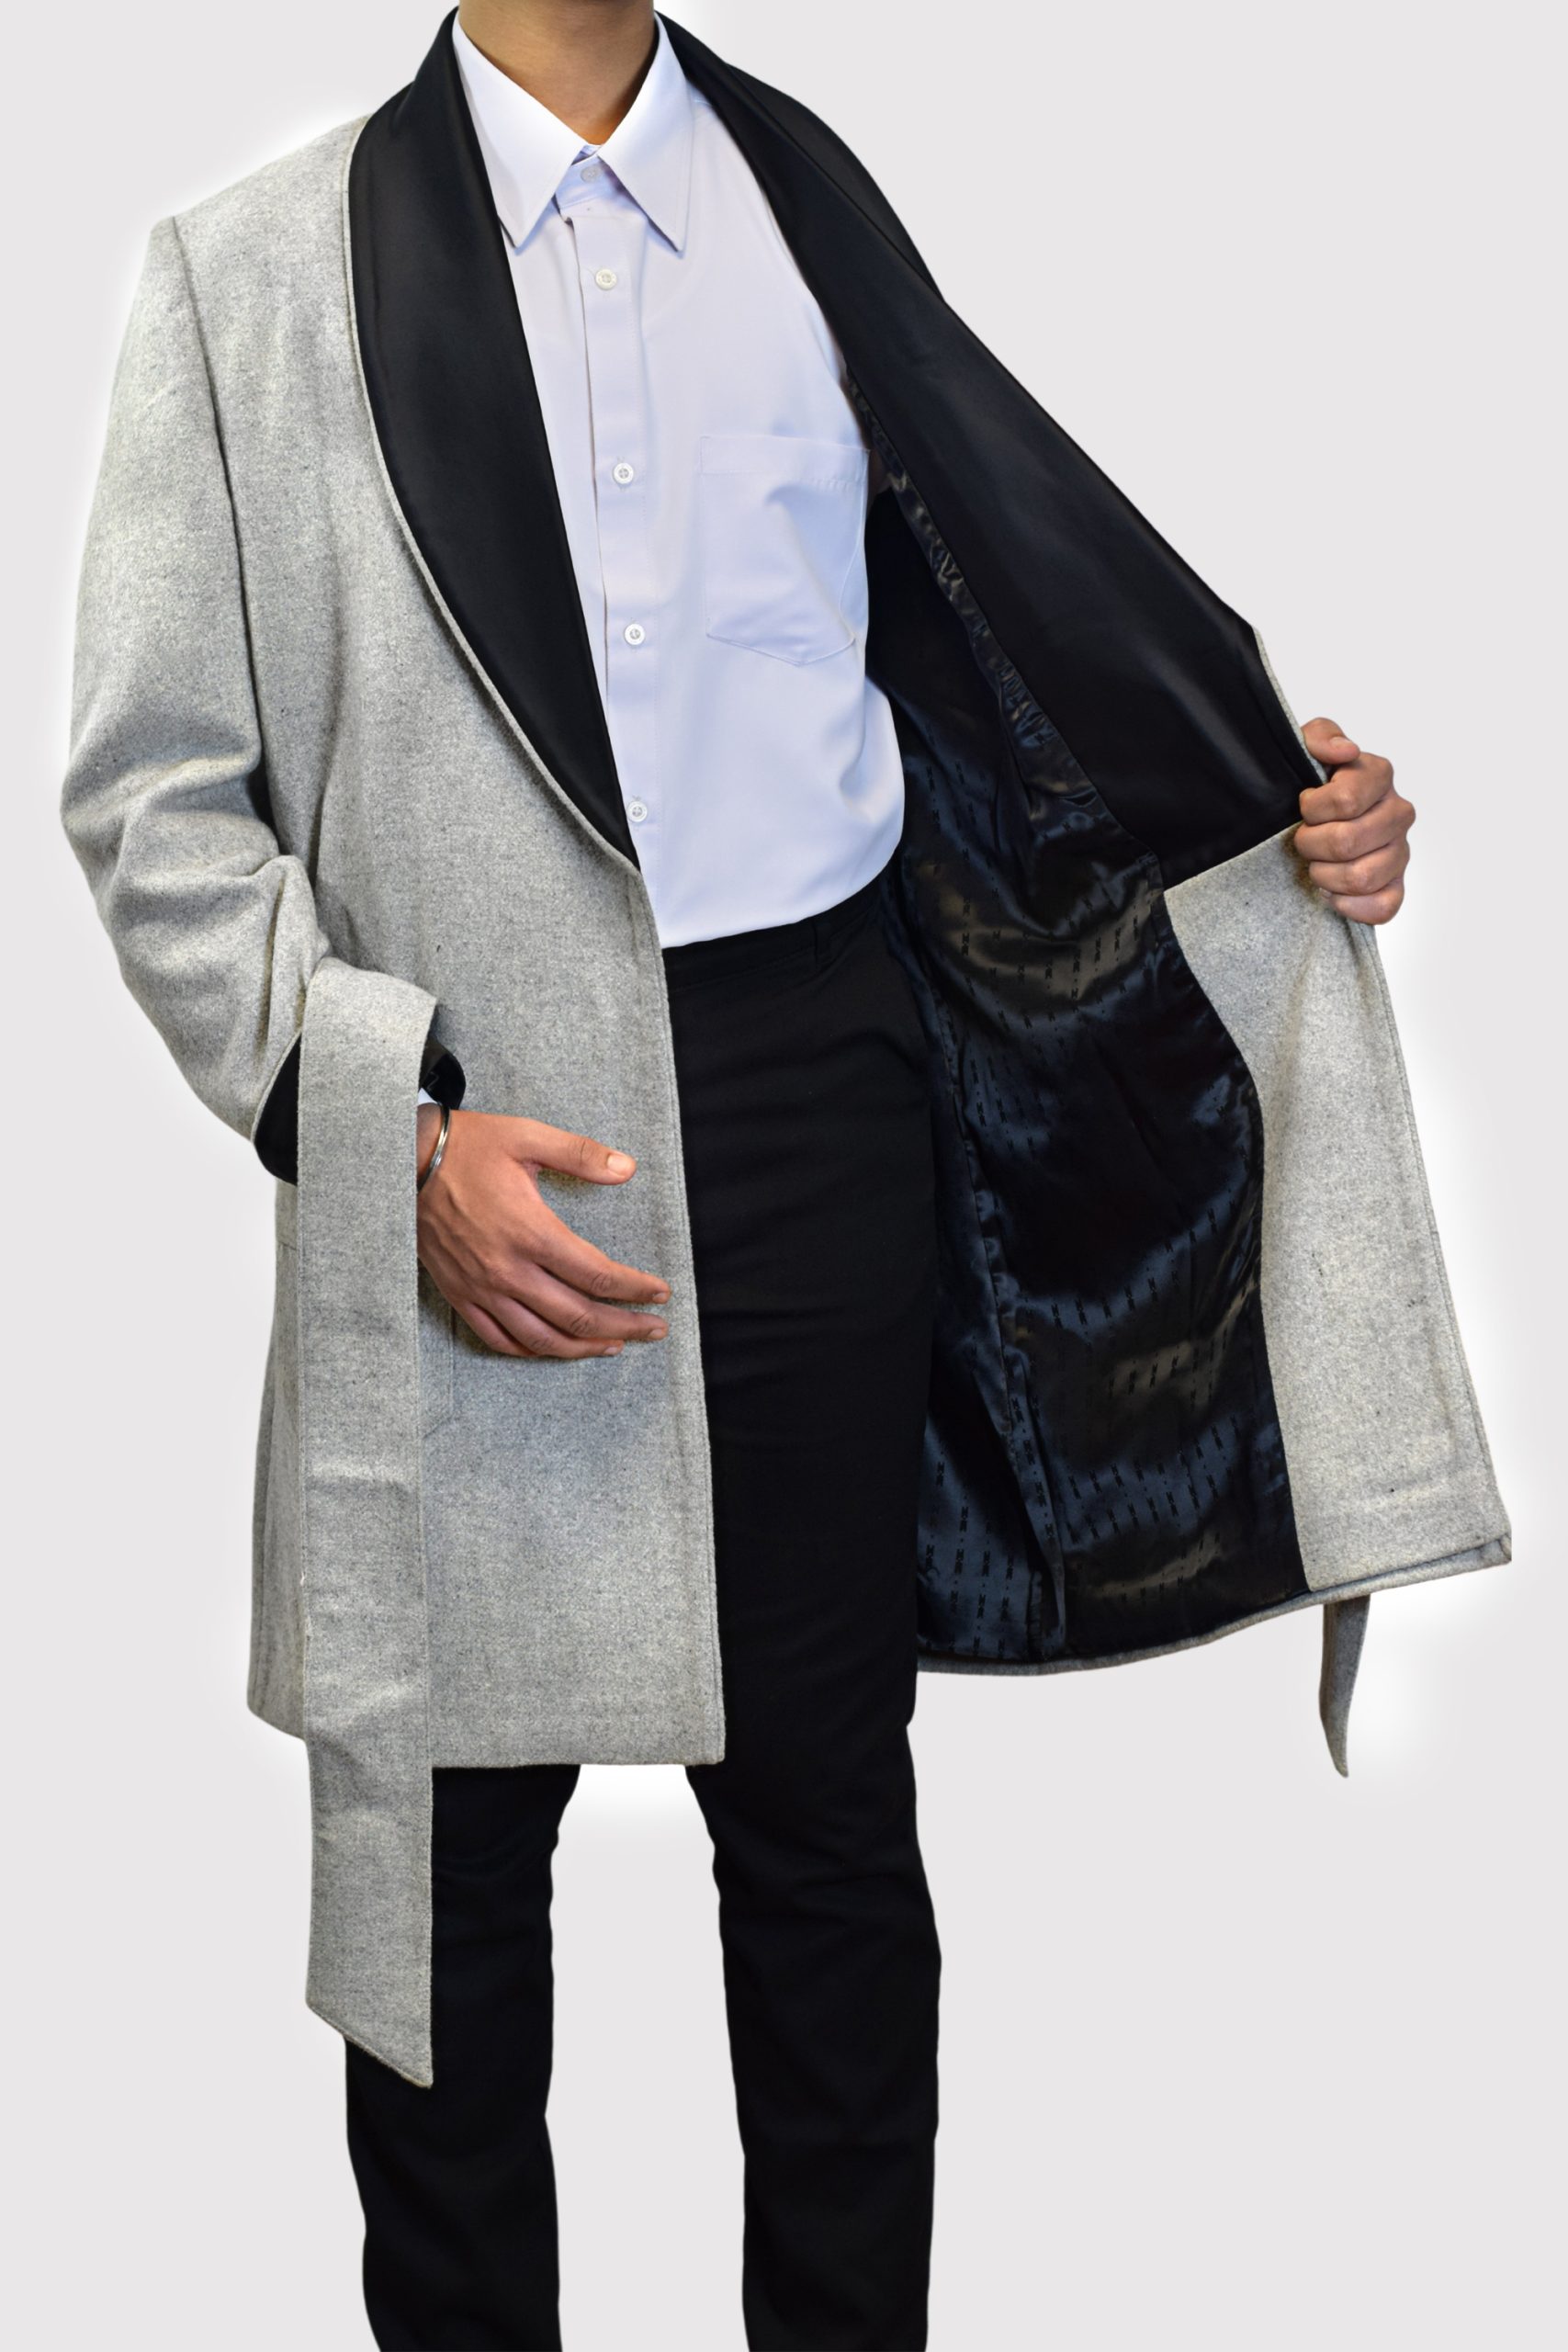 Men's Monogrammed Dressing Gowns and Smoking Jackets